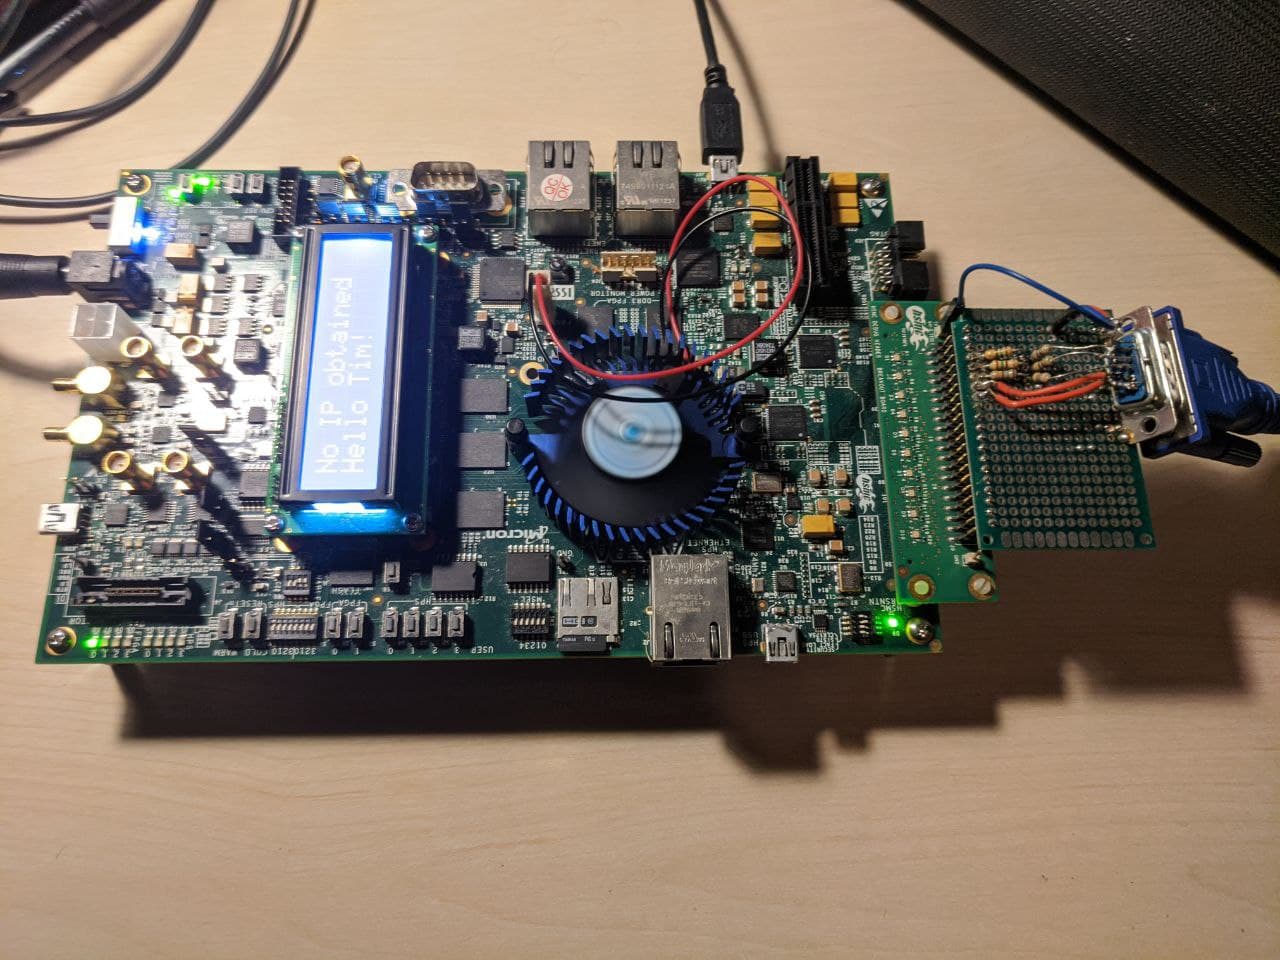 The development board hooked up to power, a PC and a VGA display.